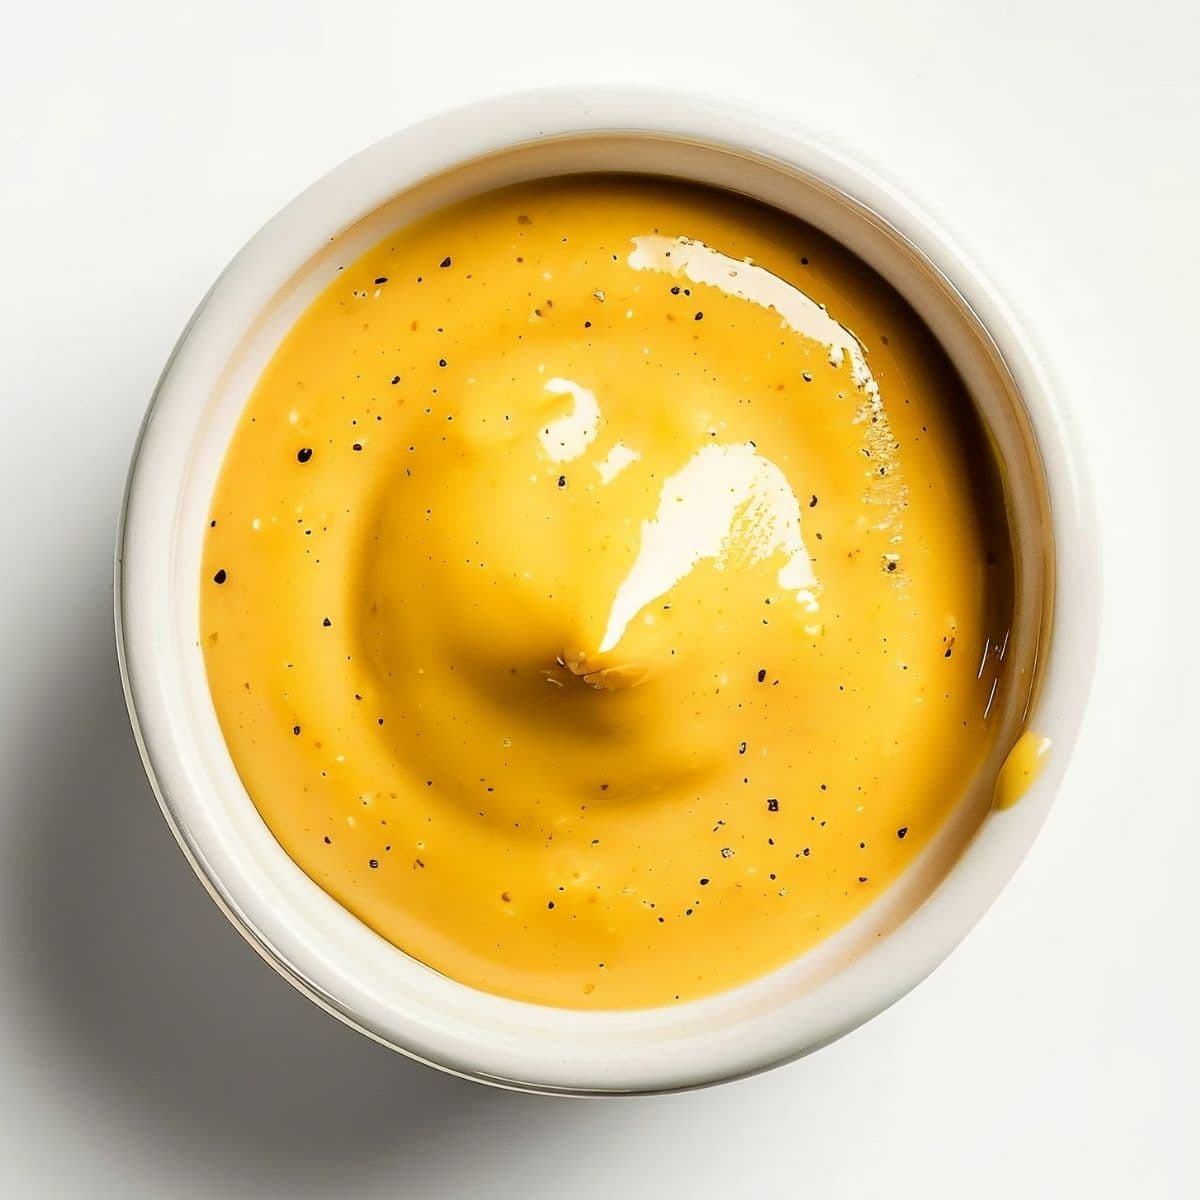 Close Top View McDonald's Hot Mustard Sauce with Seasonings in a White Ramekin on a White Table